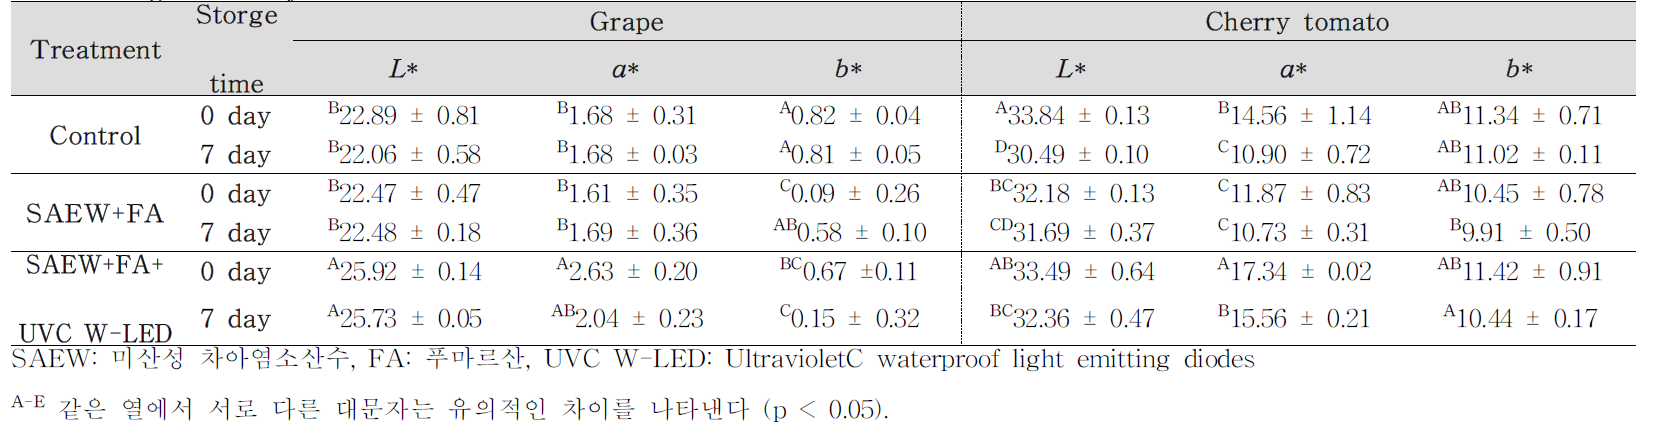 Effectiveness of disinfection treatments on color parameters (L*, a* , and b*) in grape and cherry tomato after storage for 7 days at 10°C